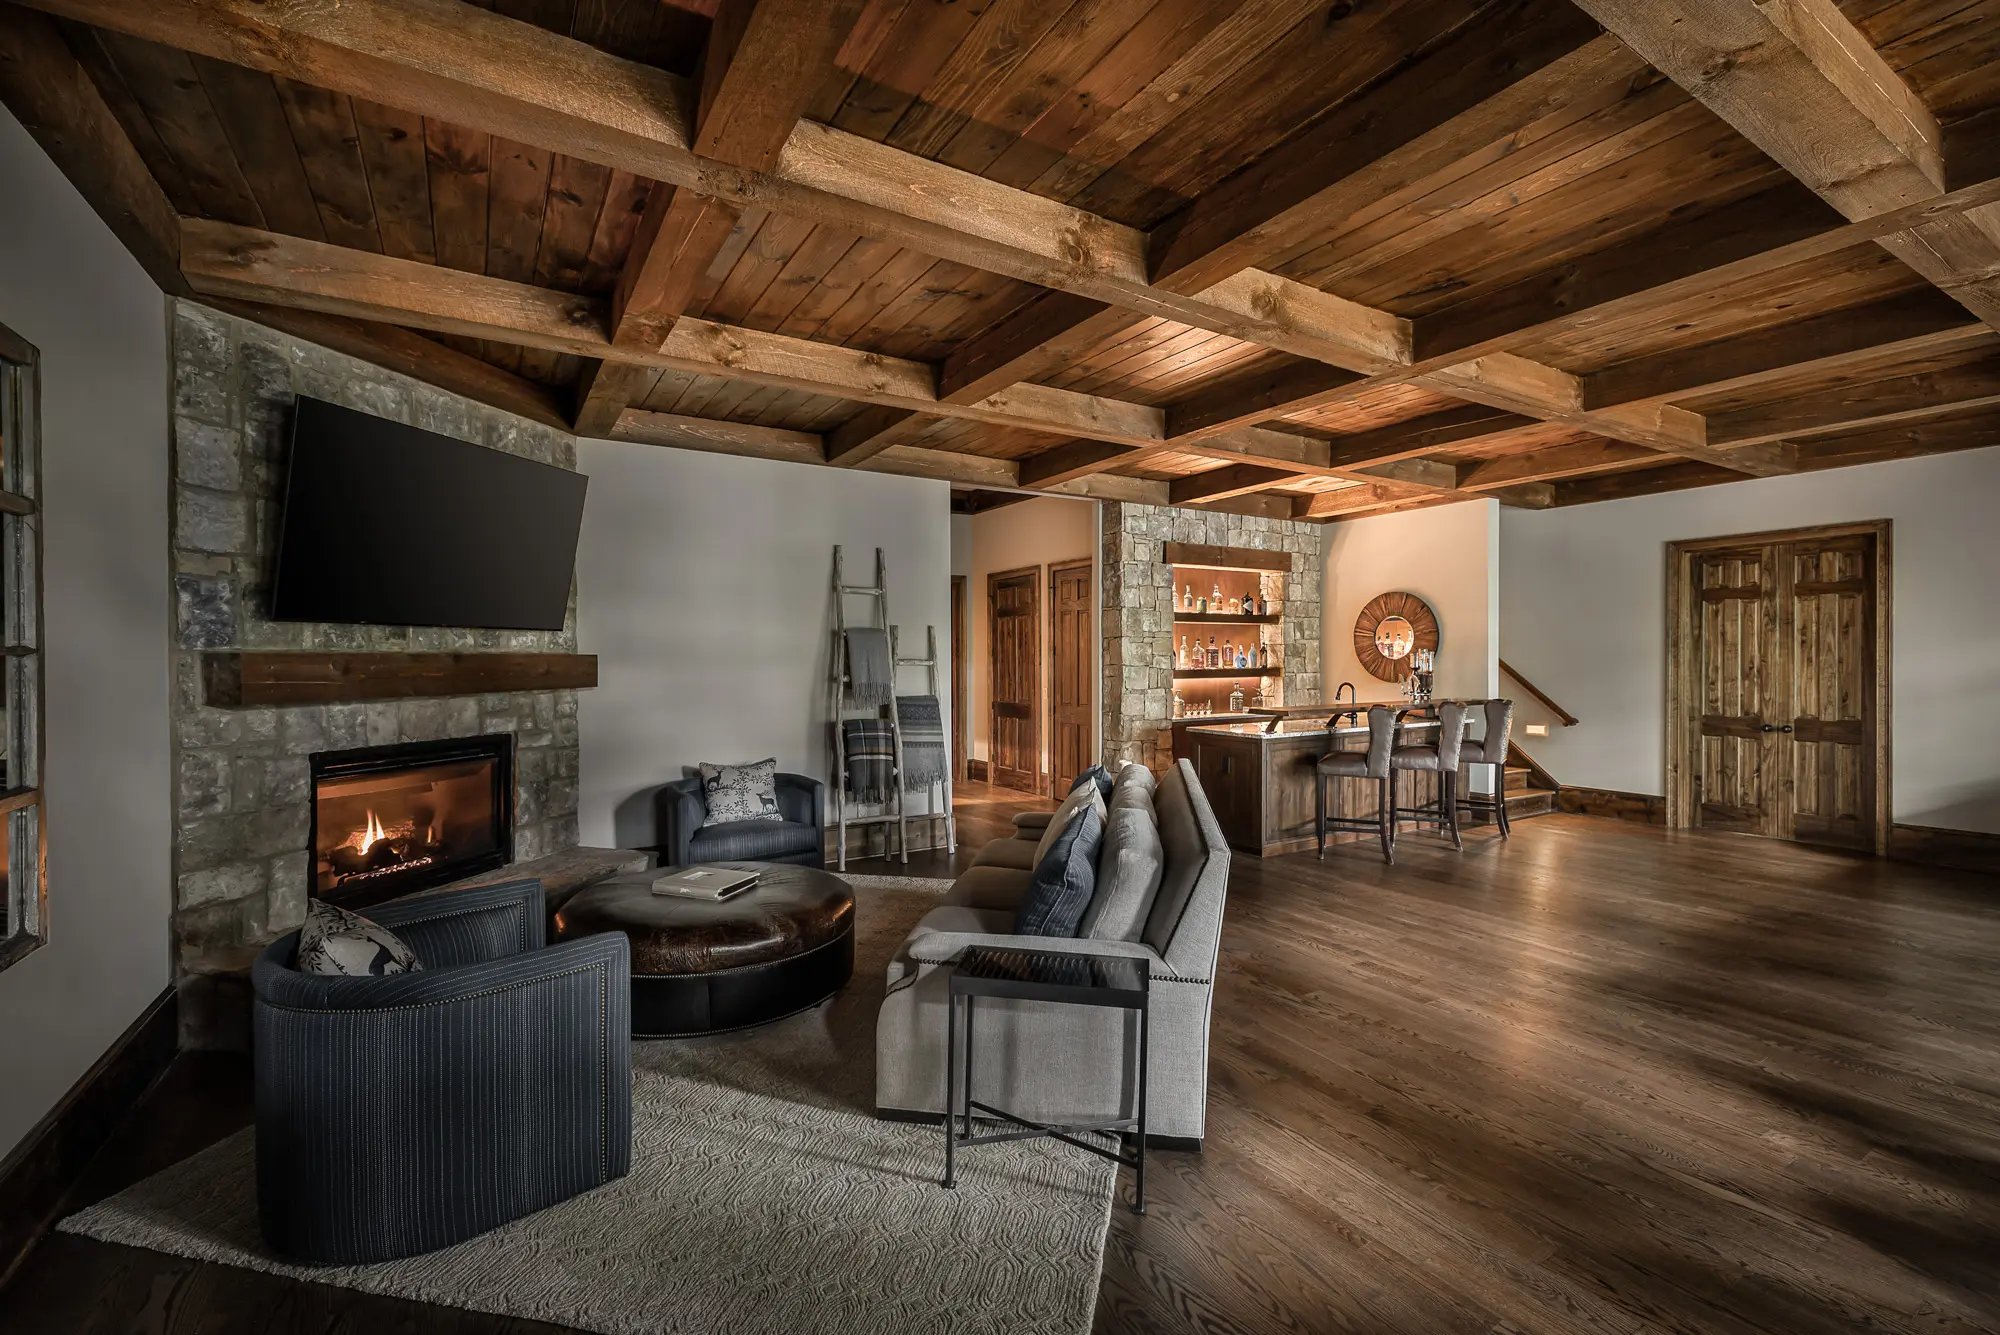  Spacious rustic living room with exposed beams, stone fireplace, and a home bar setup